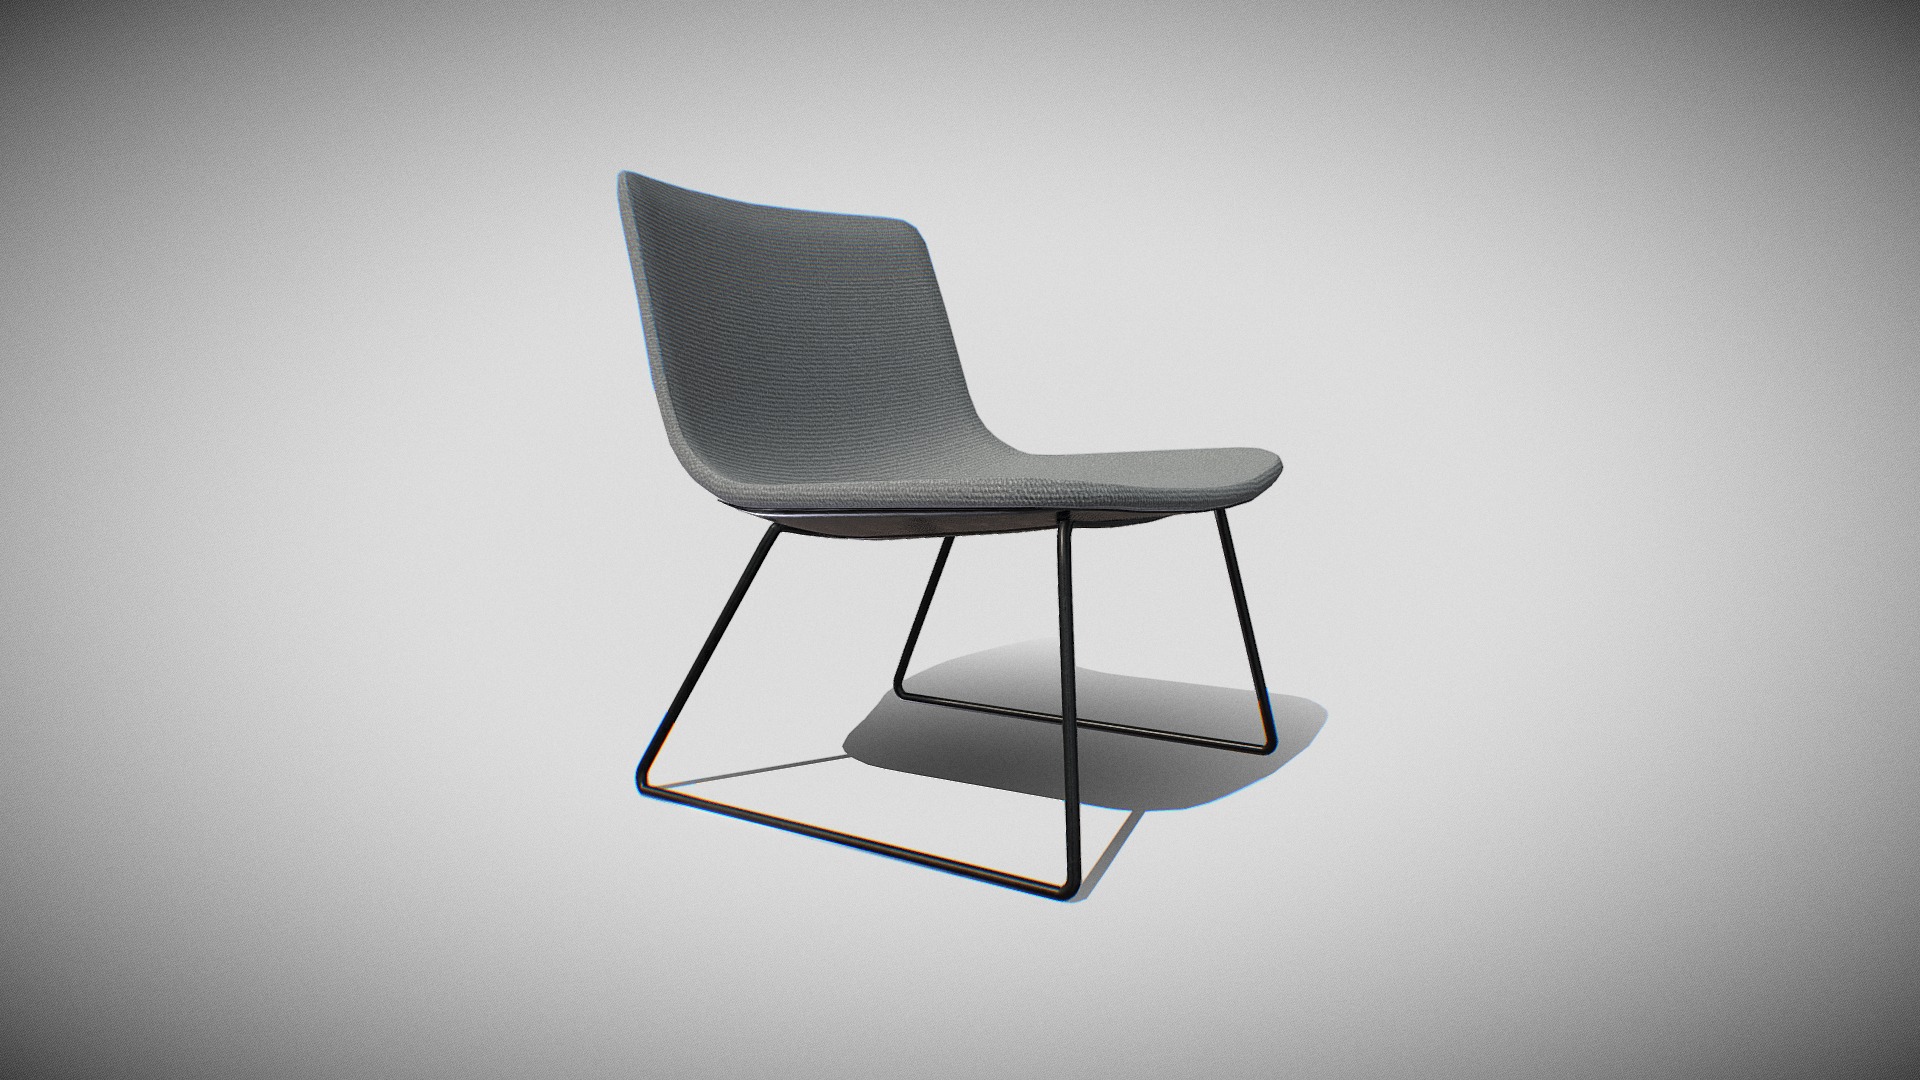 3D model PATO LOUNGE SLEDGE-fabric grey - This is a 3D model of the PATO LOUNGE SLEDGE-fabric grey. The 3D model is about a chair with a cushion.